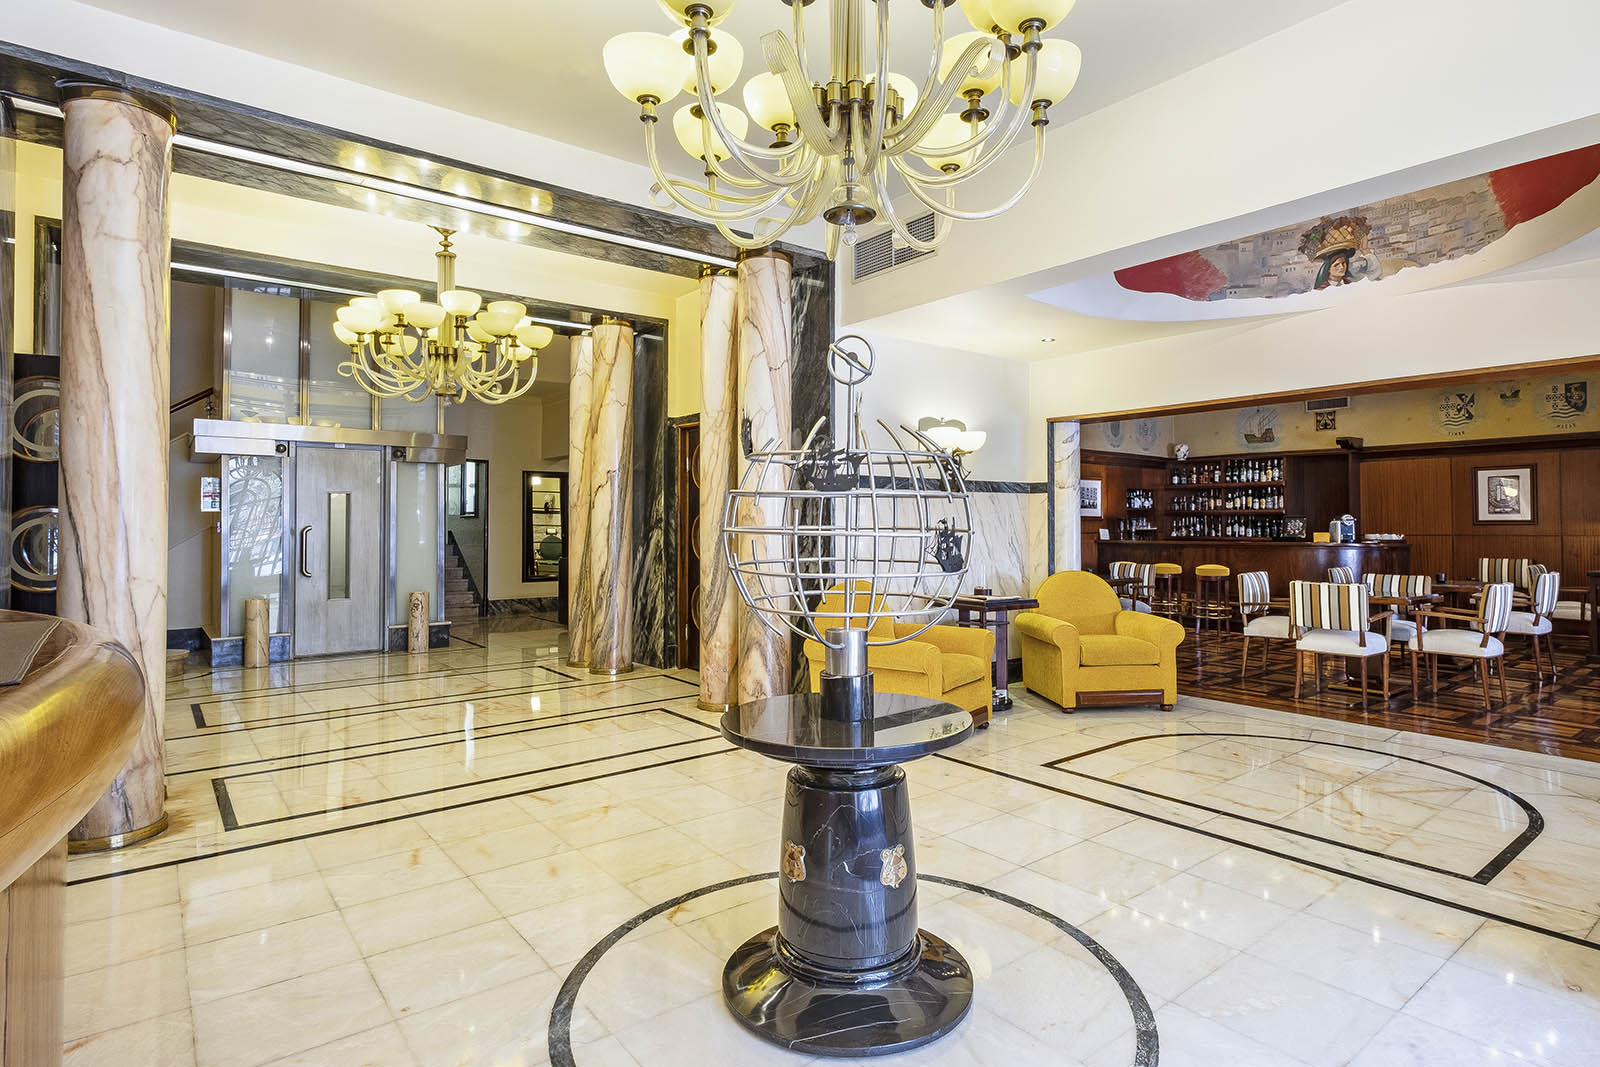 The Britania Hotel won best “Heritage & Design” Hotel at the 2019 Heritage Hotels of Europe Awards